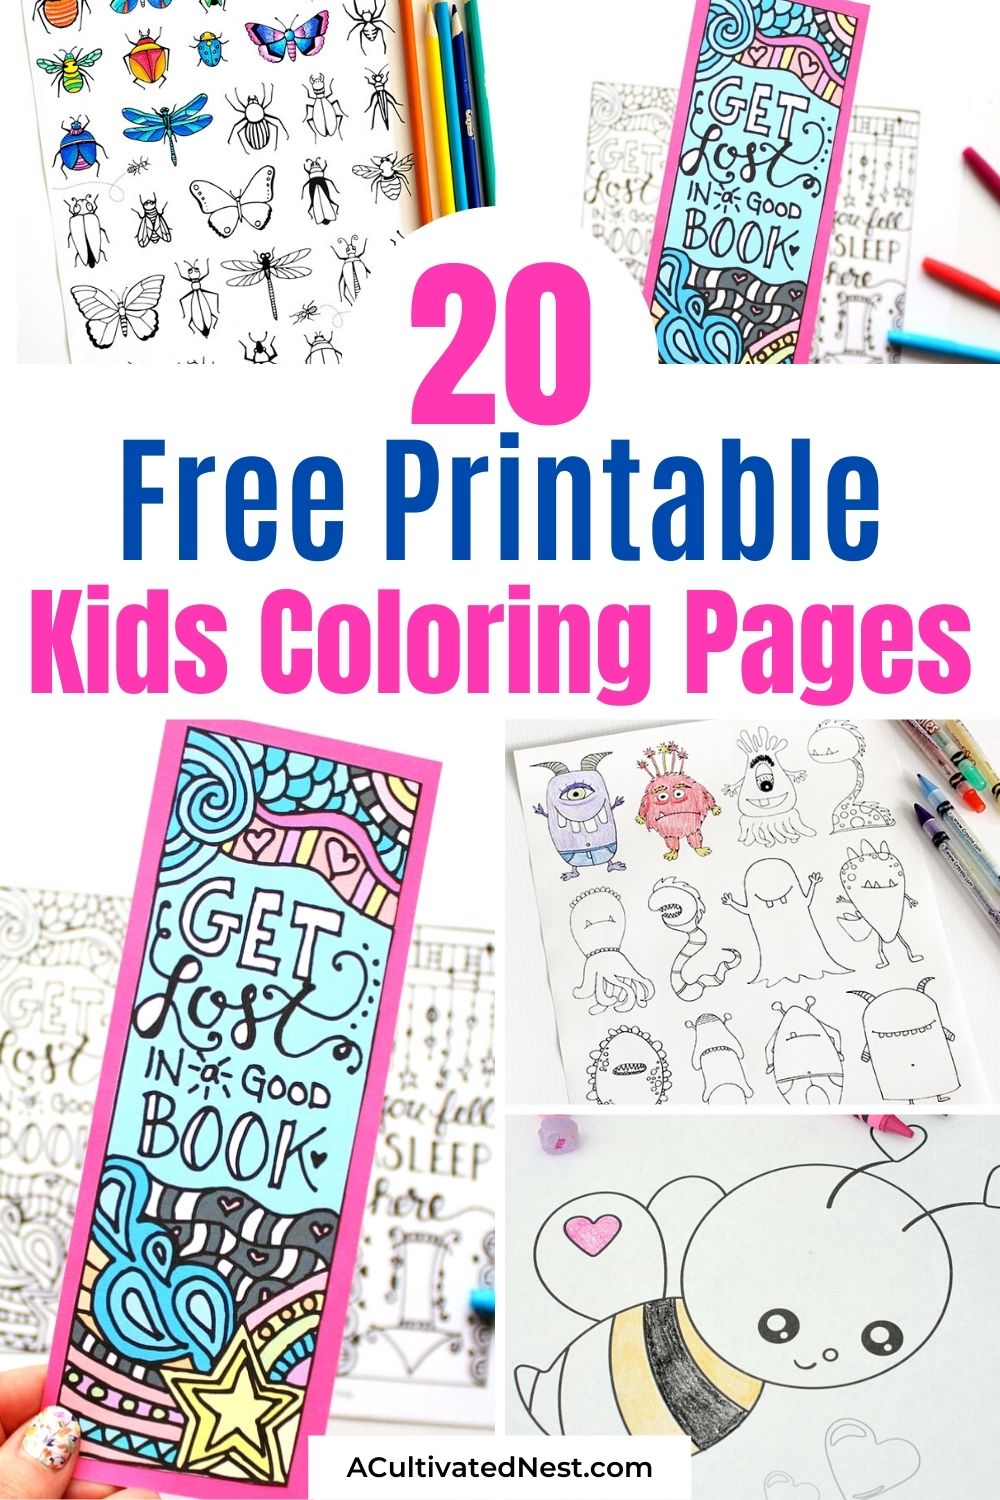 20 Free Printable Coloring Pages for Kids- If you want an easy and inexpensive way to keep your kids entertained, then you need to check out these free printable coloring pages for kids! There are so many fun pages to choose from, including seasonal coloring pages! | #freePrintables #kidsColoring #kidsActivities #freeColoringPagePrintables #ACultivatedNest